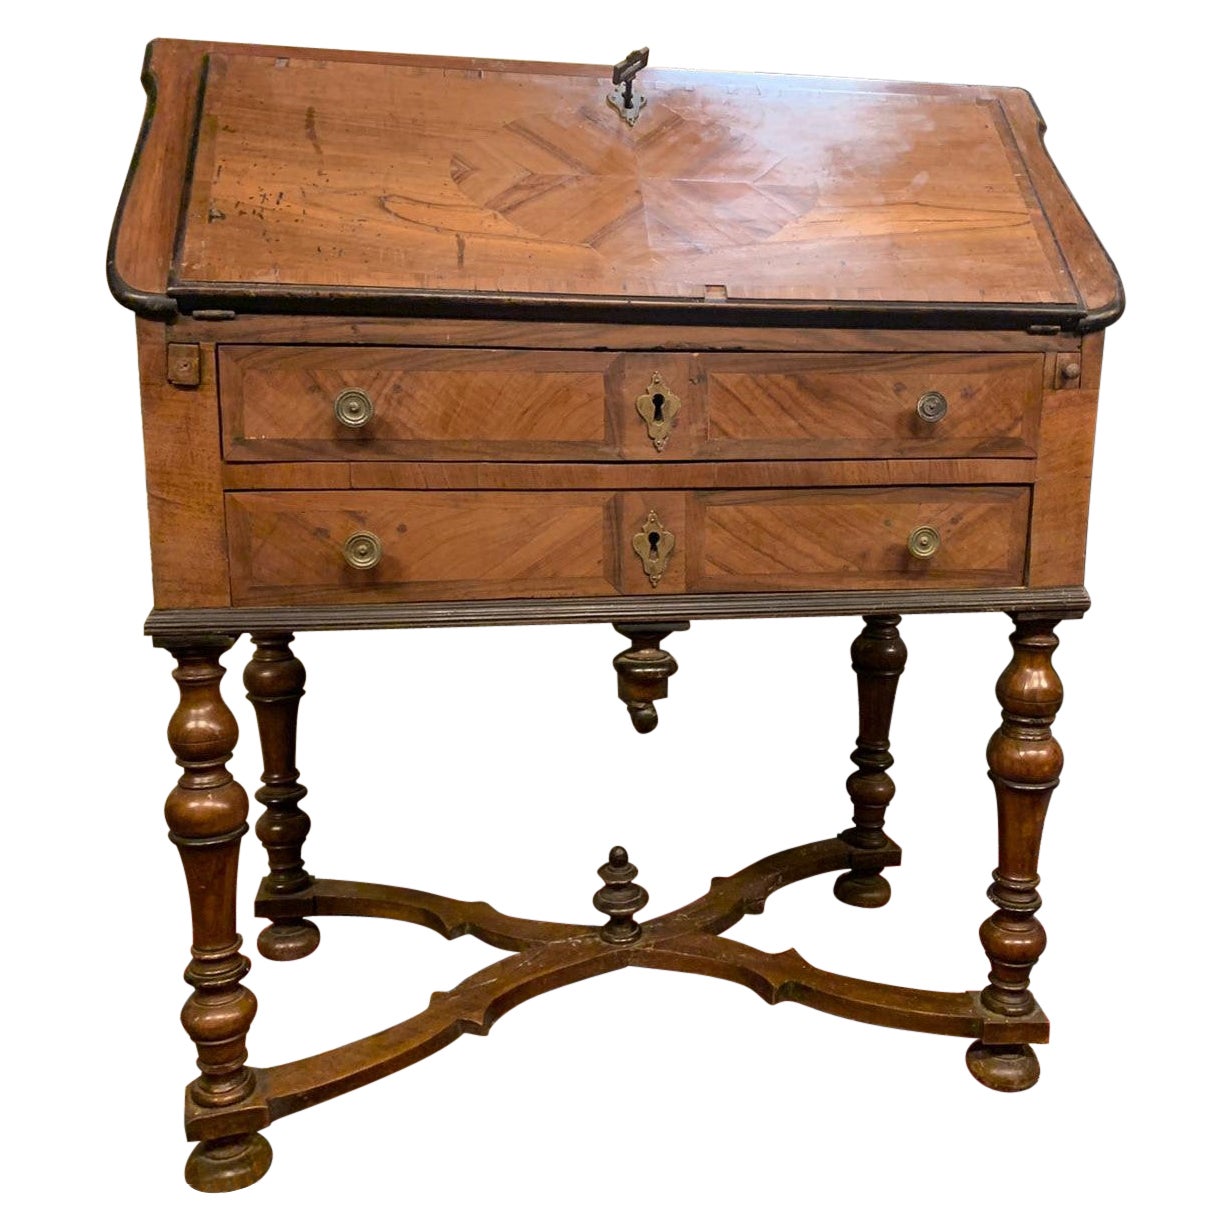 Antique Flap Writing Desk in Walnut, Carved Cross Legs, Early 18th Century Italy For Sale